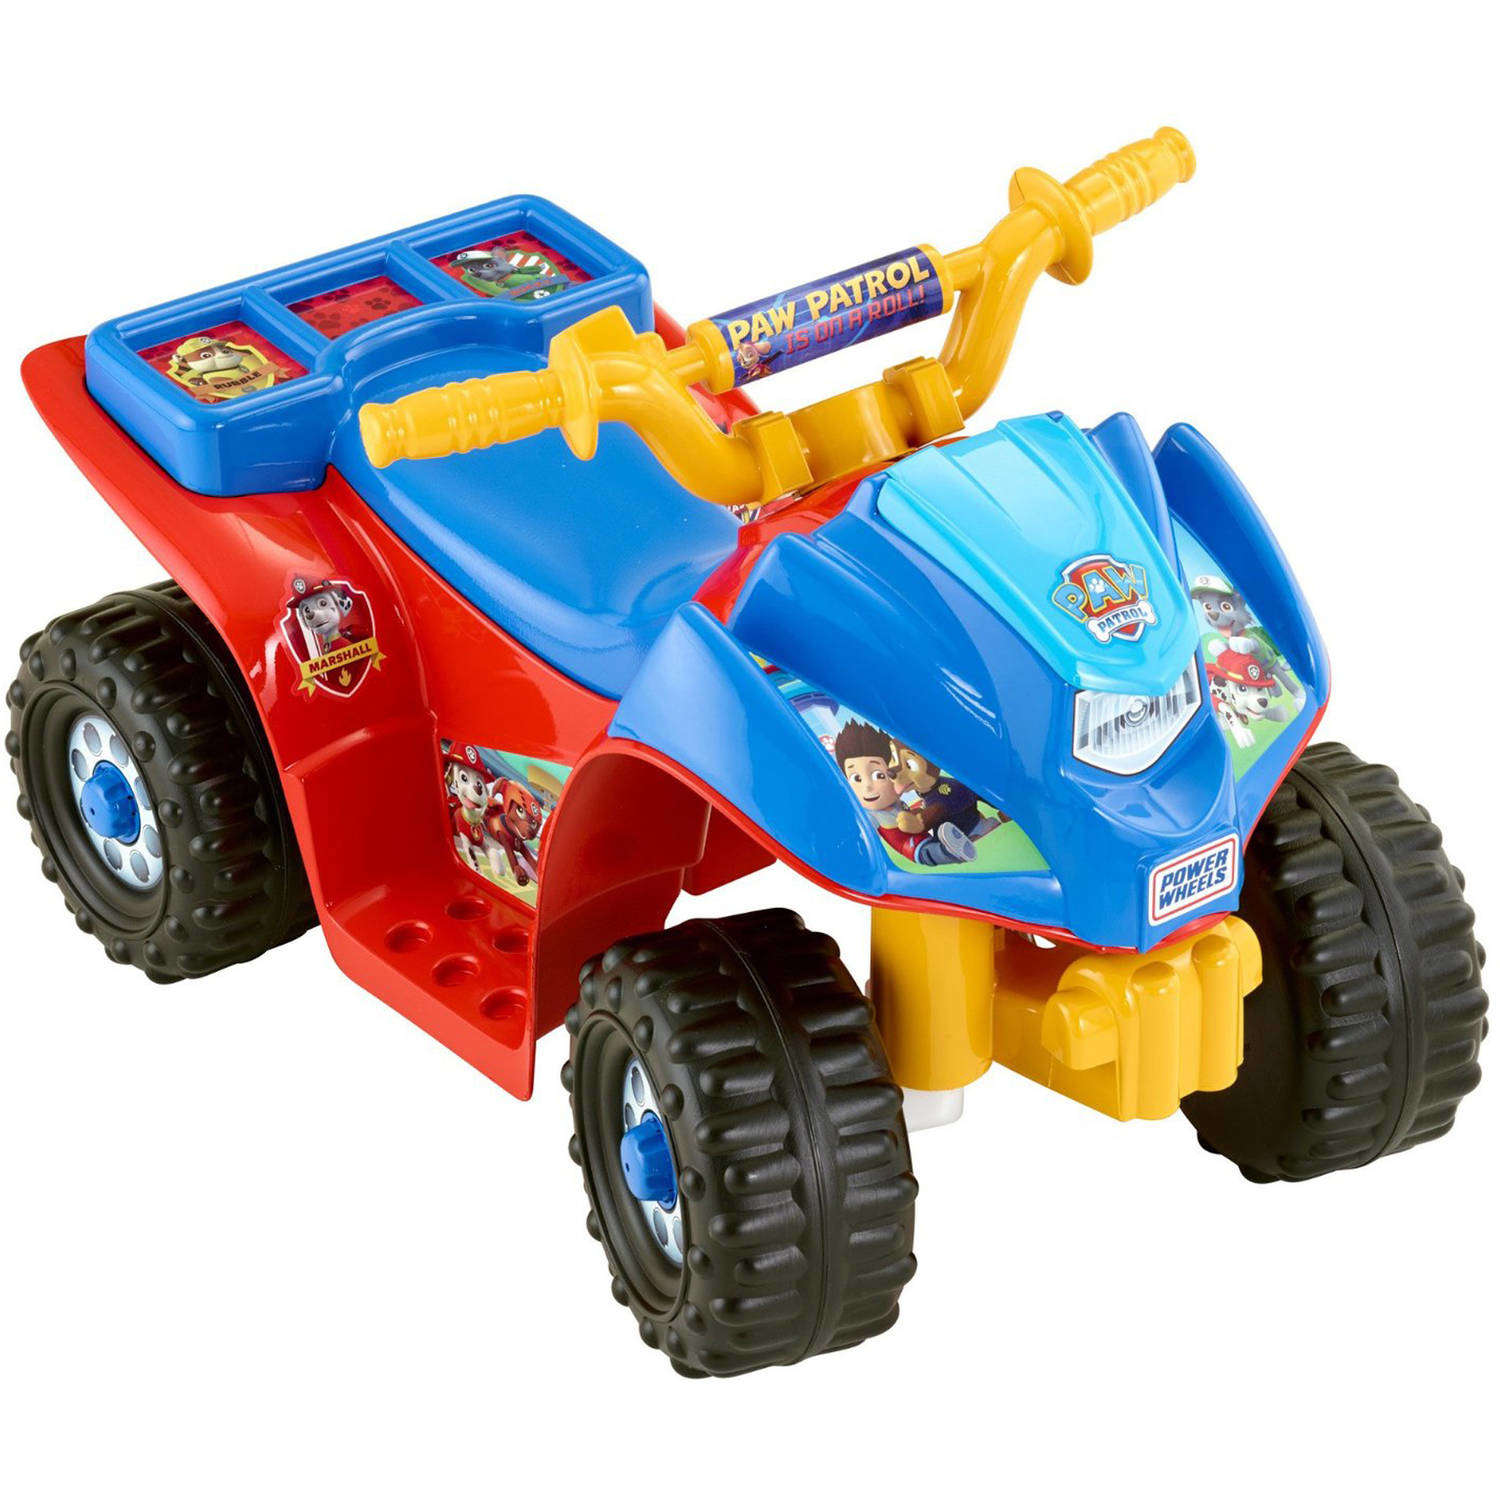 Power Wheels PAW Patrol Lil' Quad 6-Volt Battery-Powered Vehicle - image 2 of 9